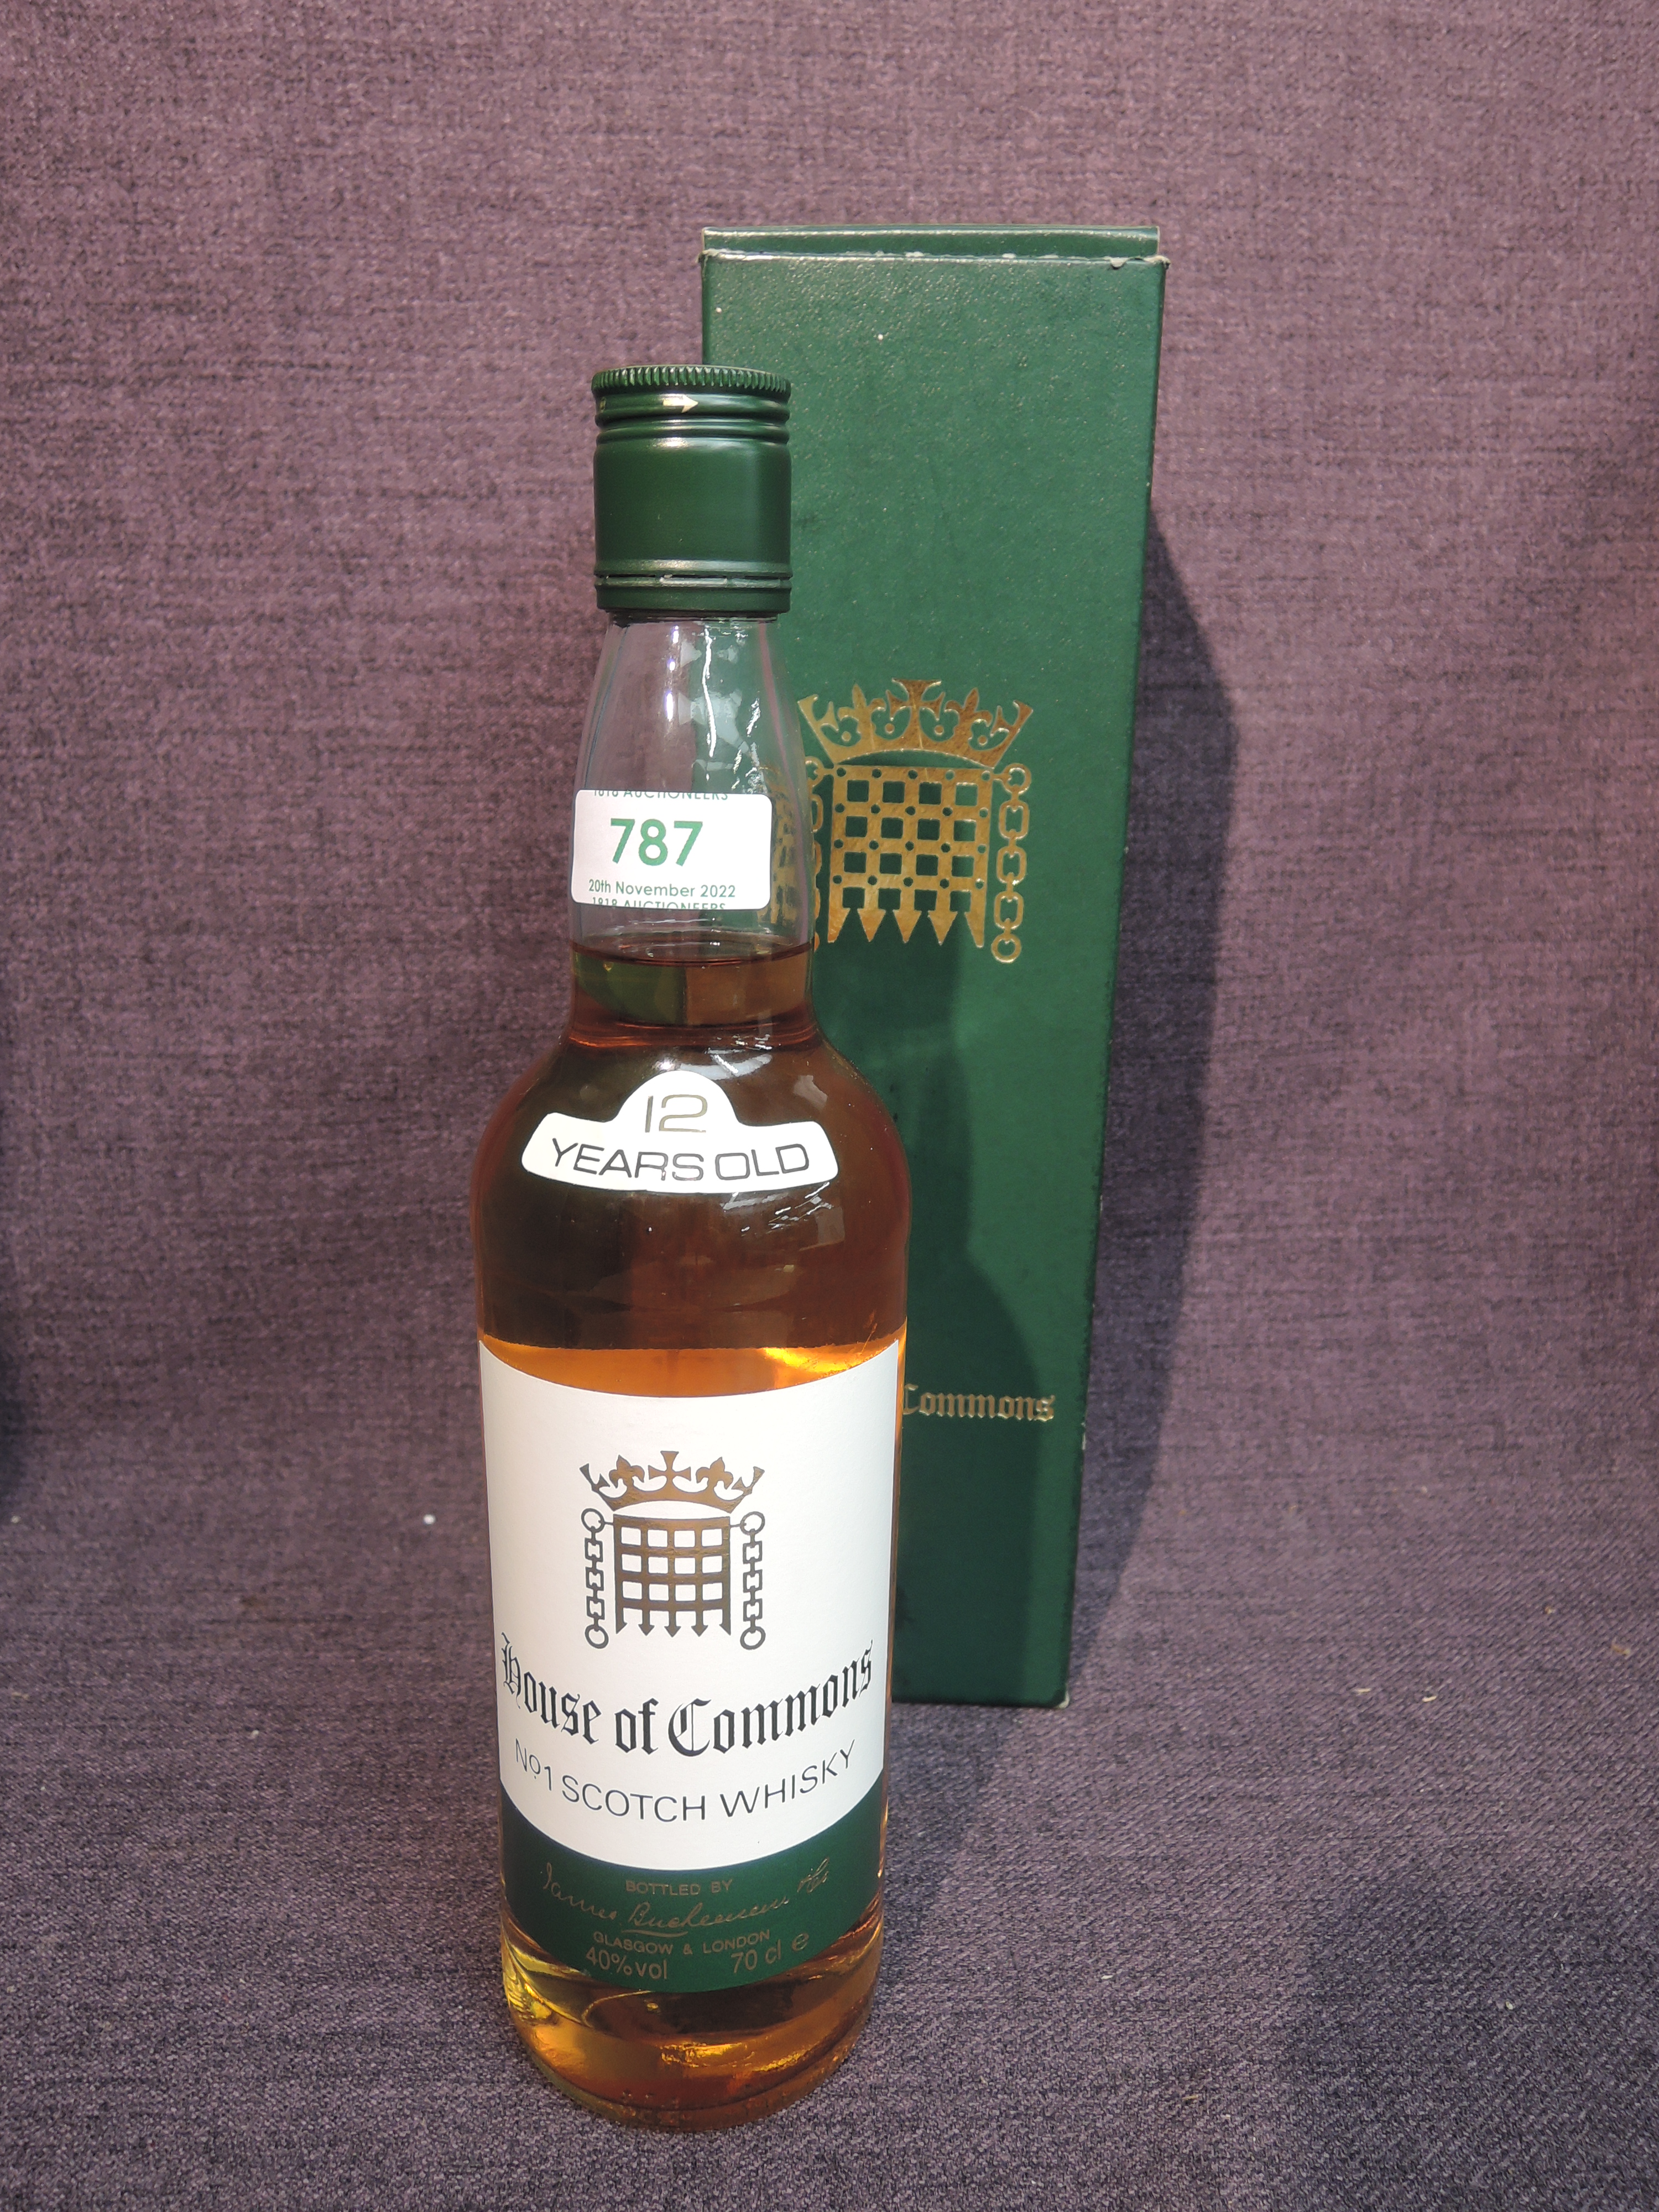 A bottle of House of Commons 12 Year Old Blended No 1 Scotch Whisky, 40% vol, 70cl in card box